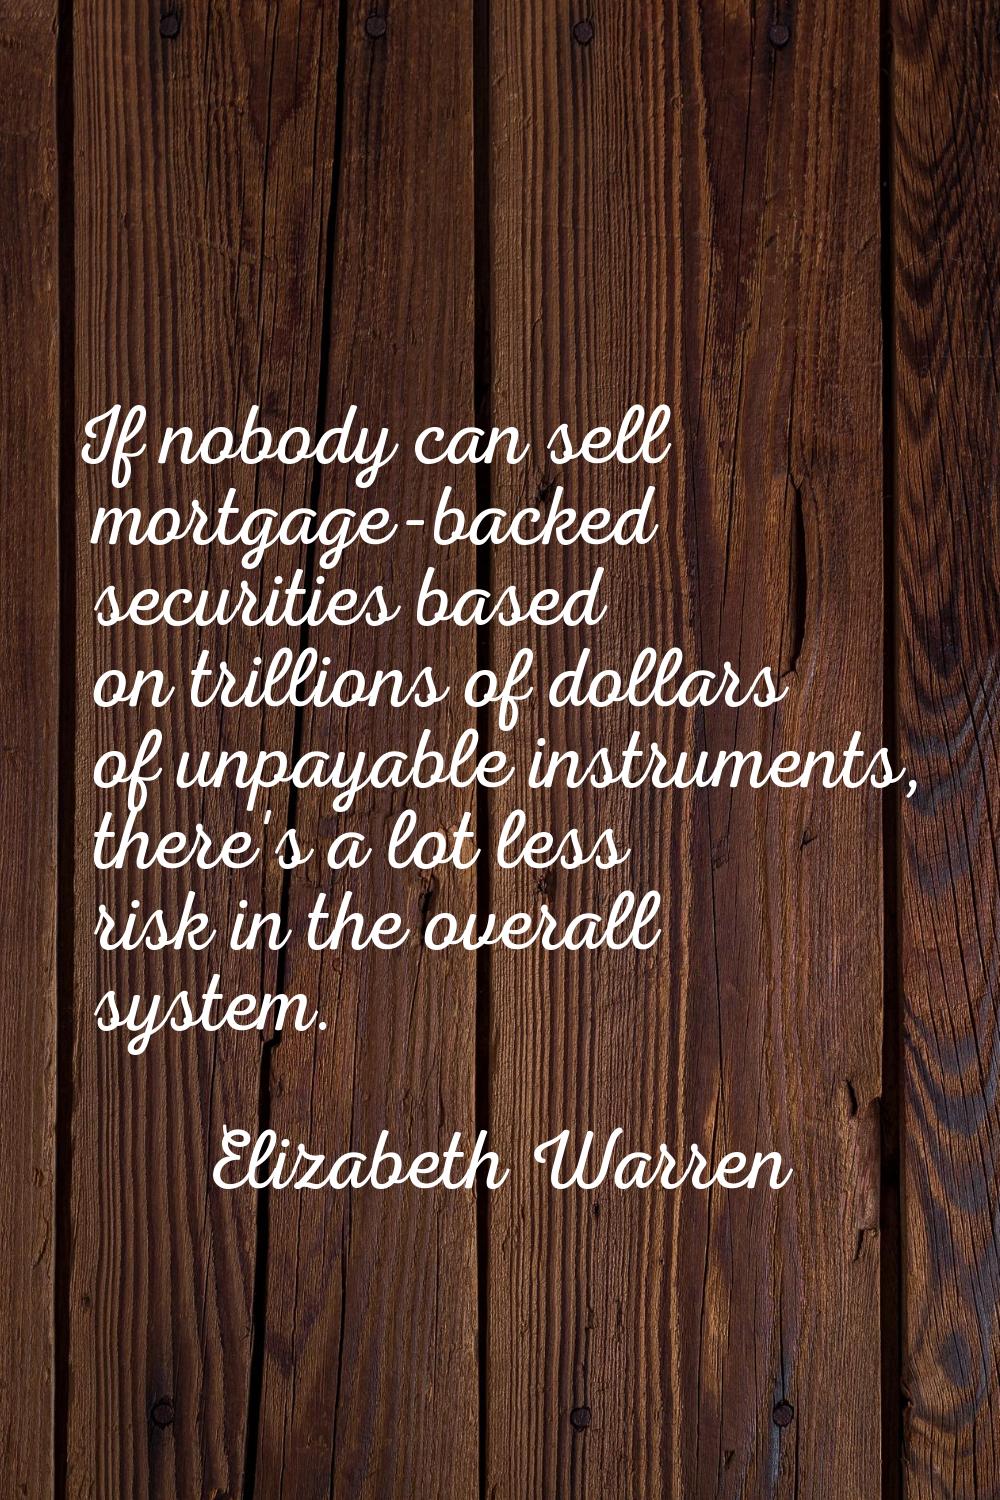 If nobody can sell mortgage-backed securities based on trillions of dollars of unpayable instrument